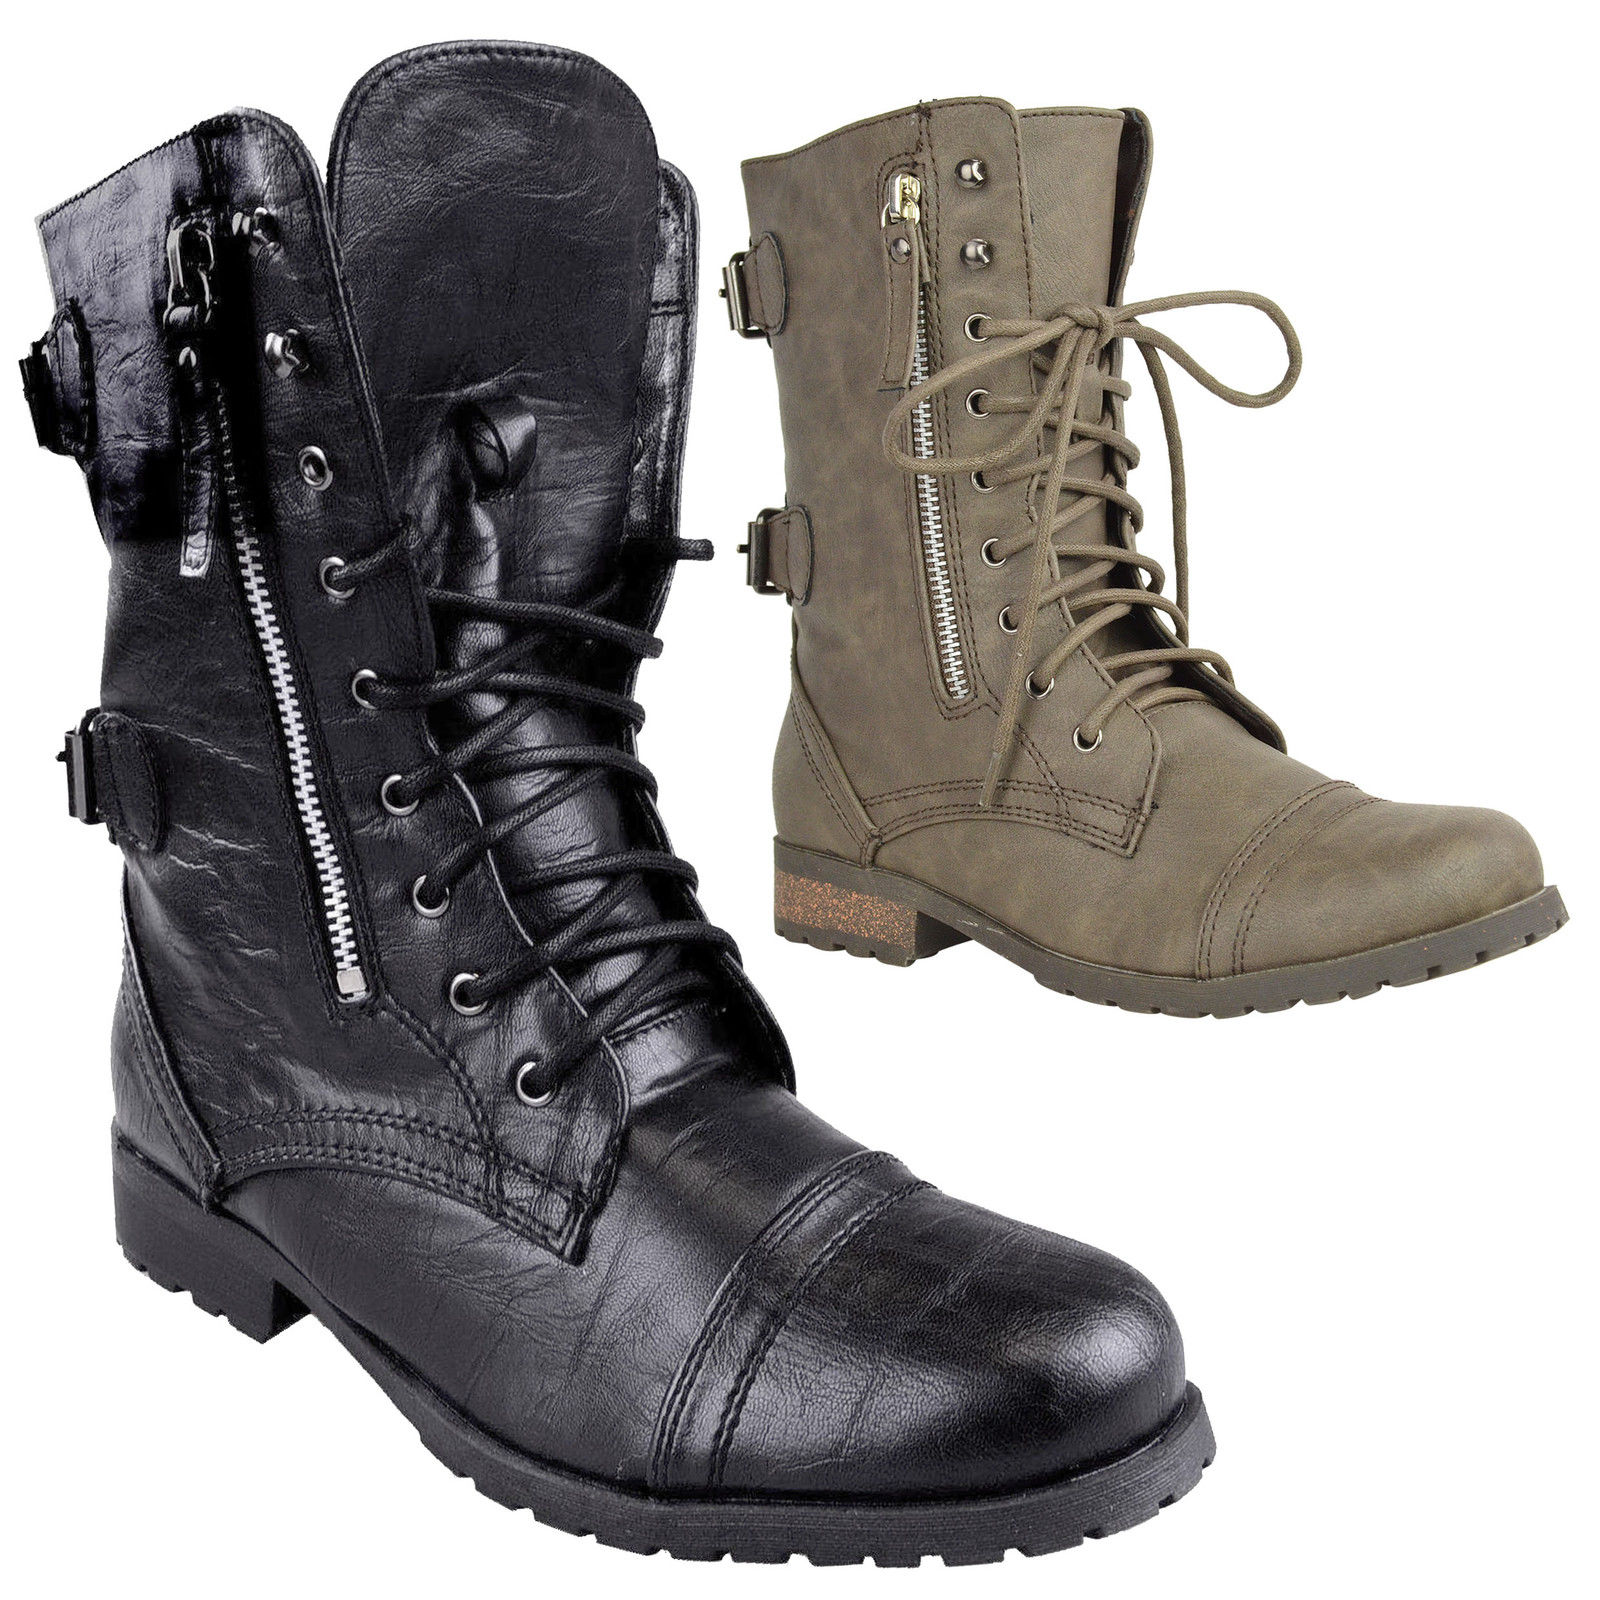 LADIES WOMENS COMBAT ARMY MILITARY WORKER LACE UP FLAT BIKER ZIP ANKLE BOOTS